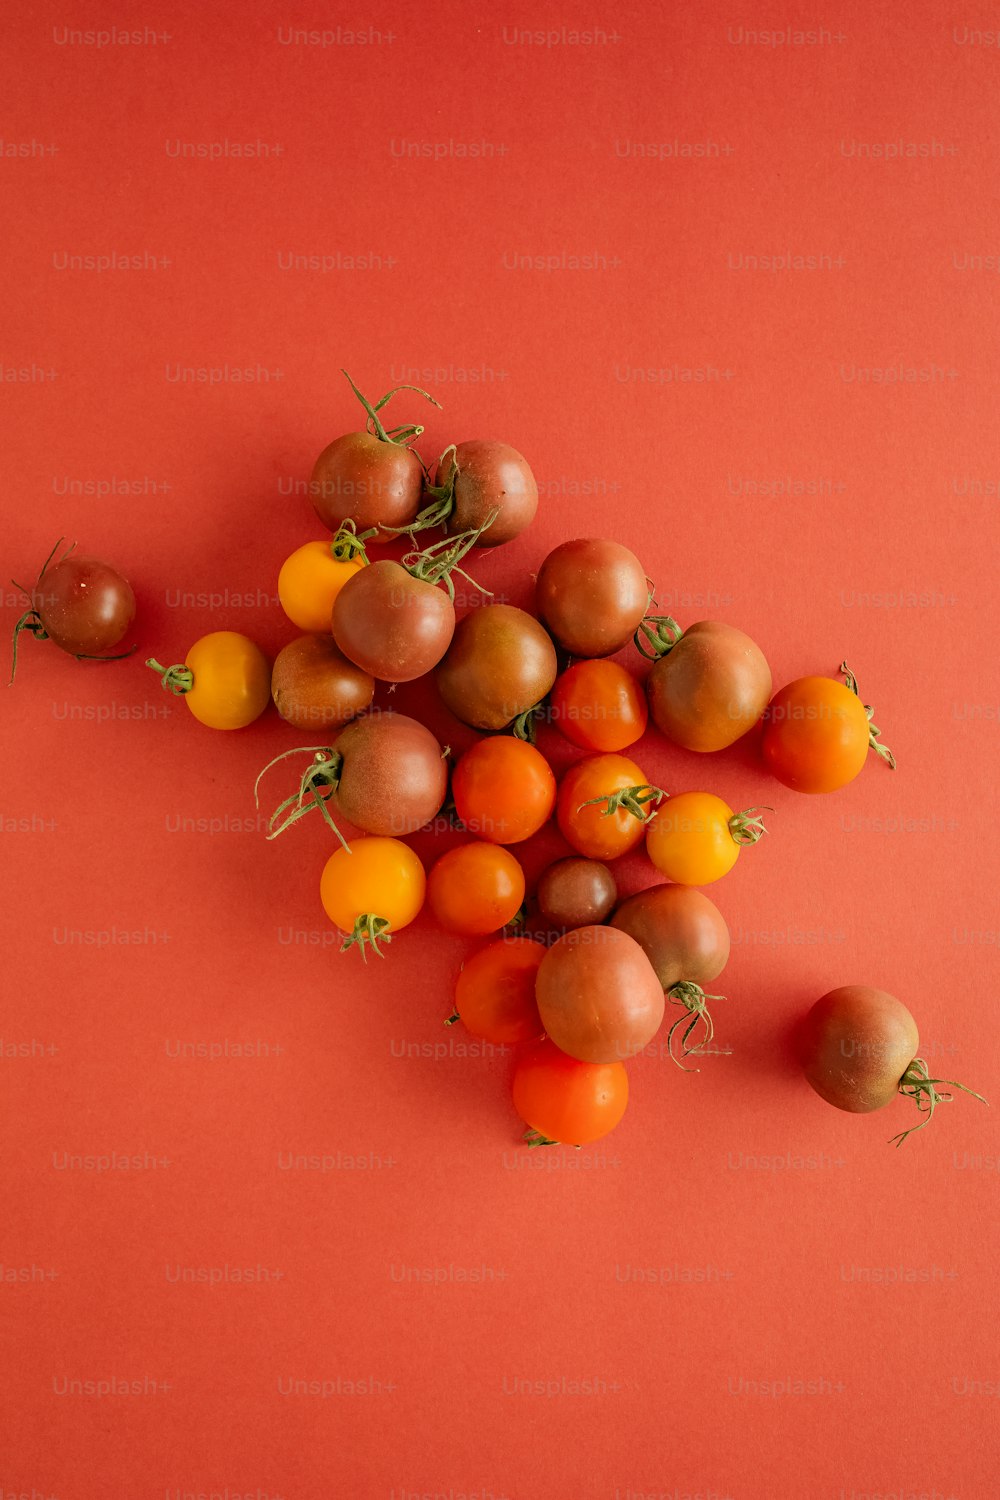 a pile of tomatoes and oranges on a red surface